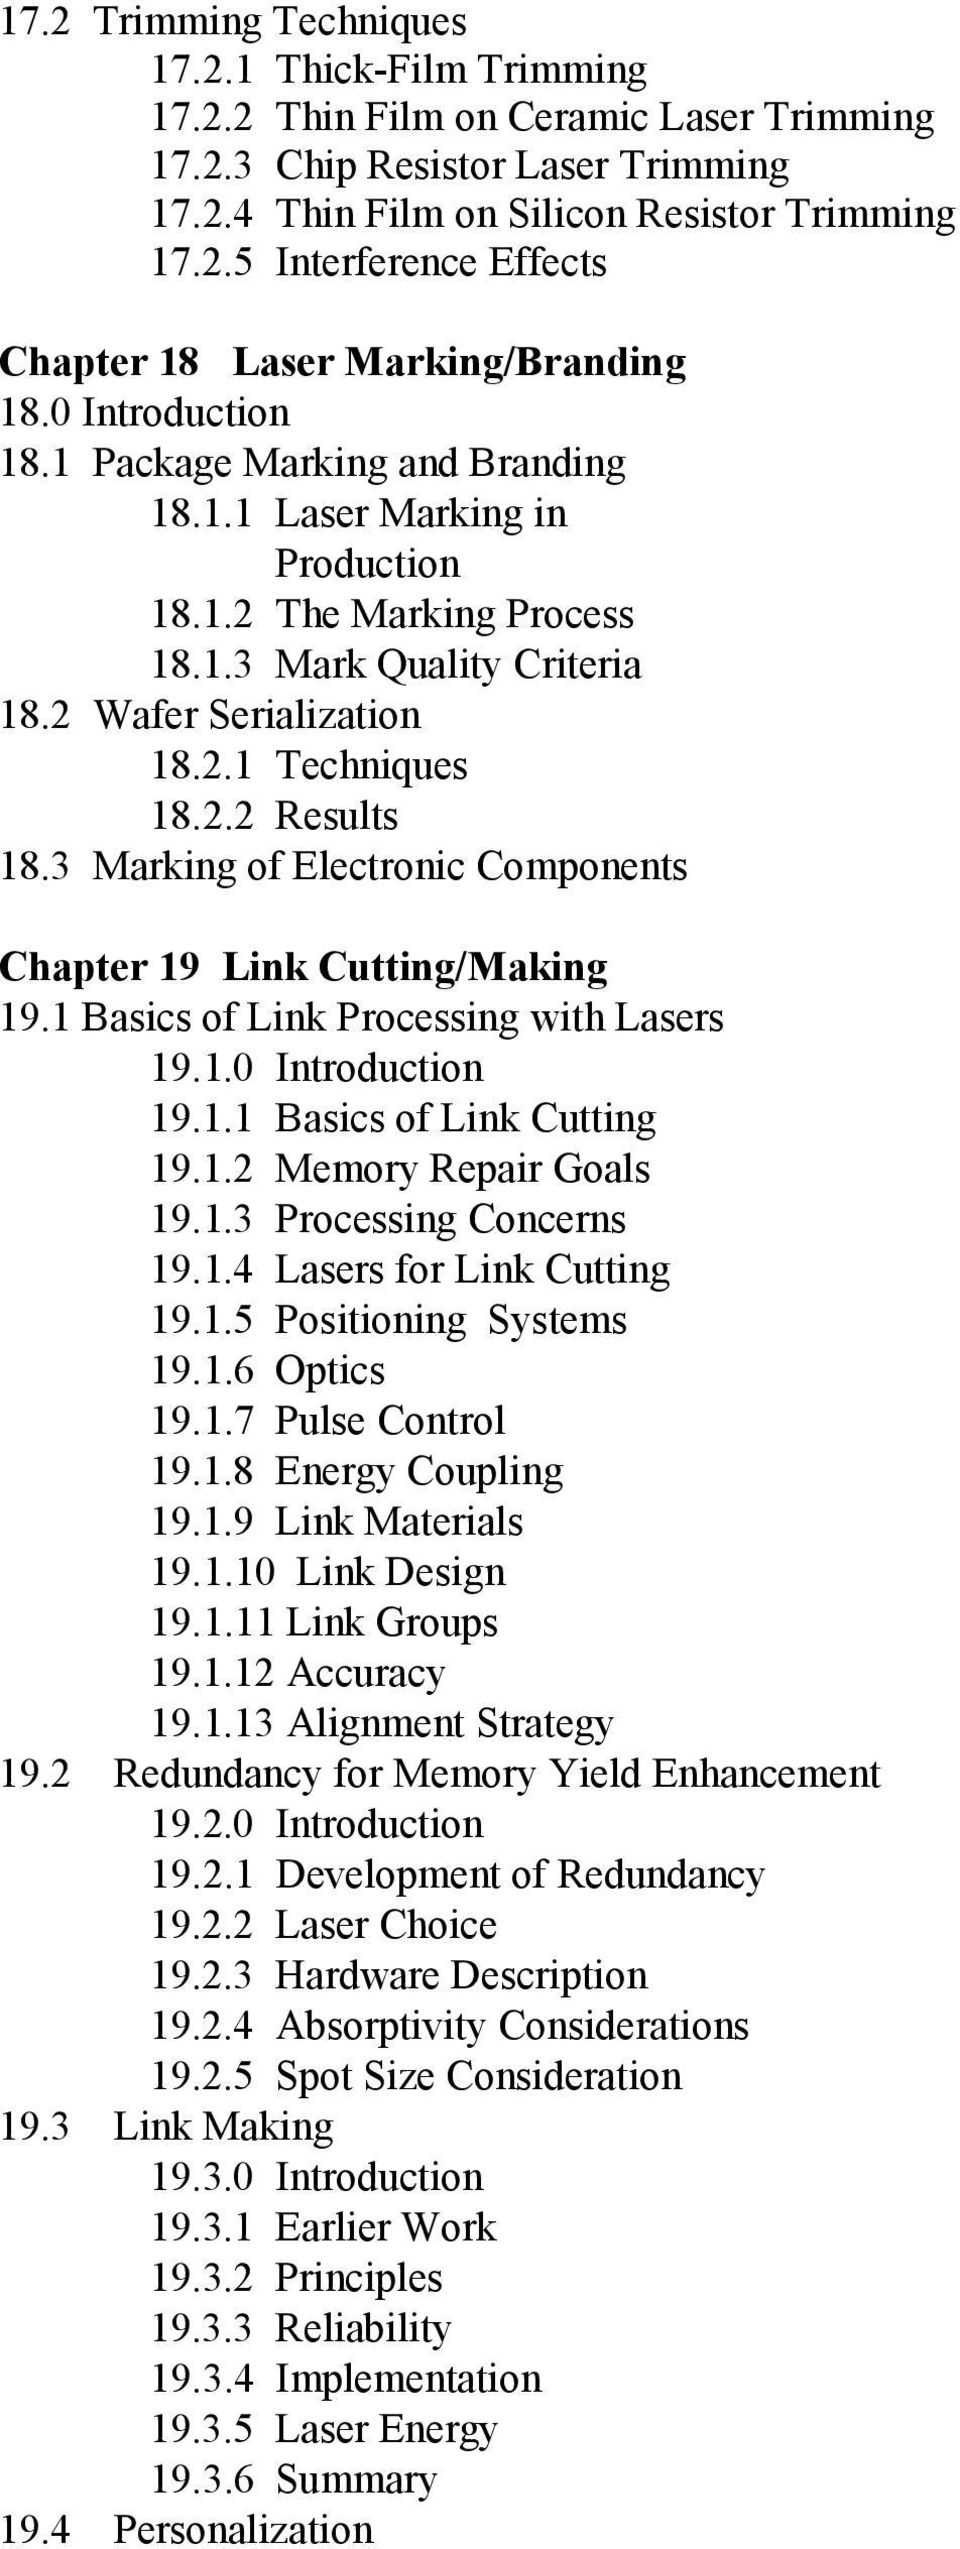 3 Marking of Electronic Components Chapter 19 Link Cutting/Making 19.1 Basics of Link Processing with Lasers 19.1.0 Introduction 19.1.1 Basics of Link Cutting 19.1.2 Memory Repair Goals 19.1.3 Processing Concerns 19.